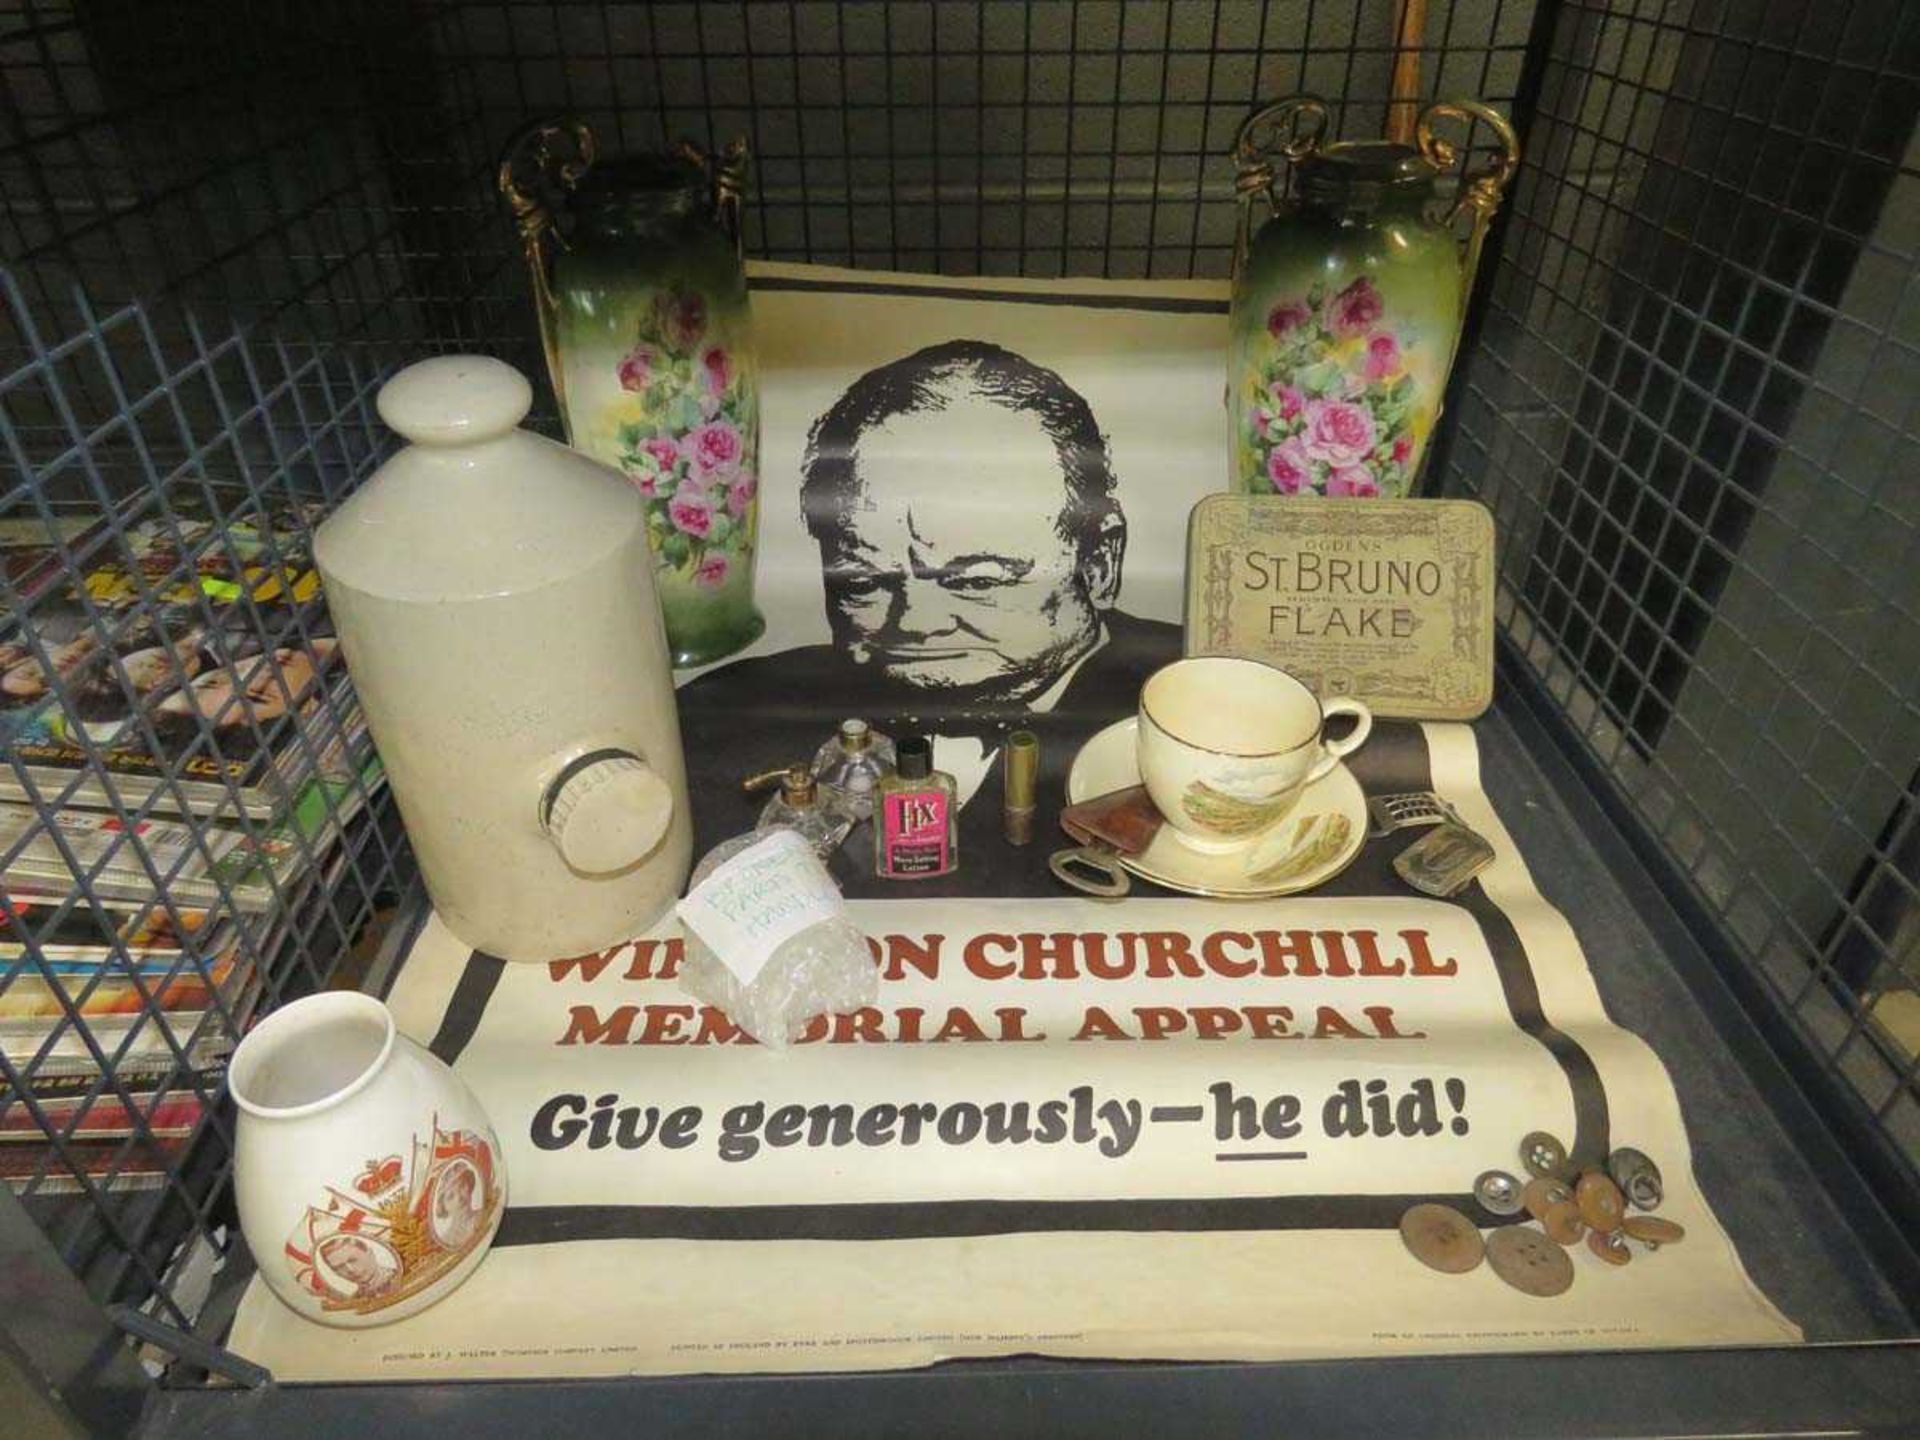 Cage containing buttons, Winston Churchill memorial appeal poster, foot warmer, rose patterned